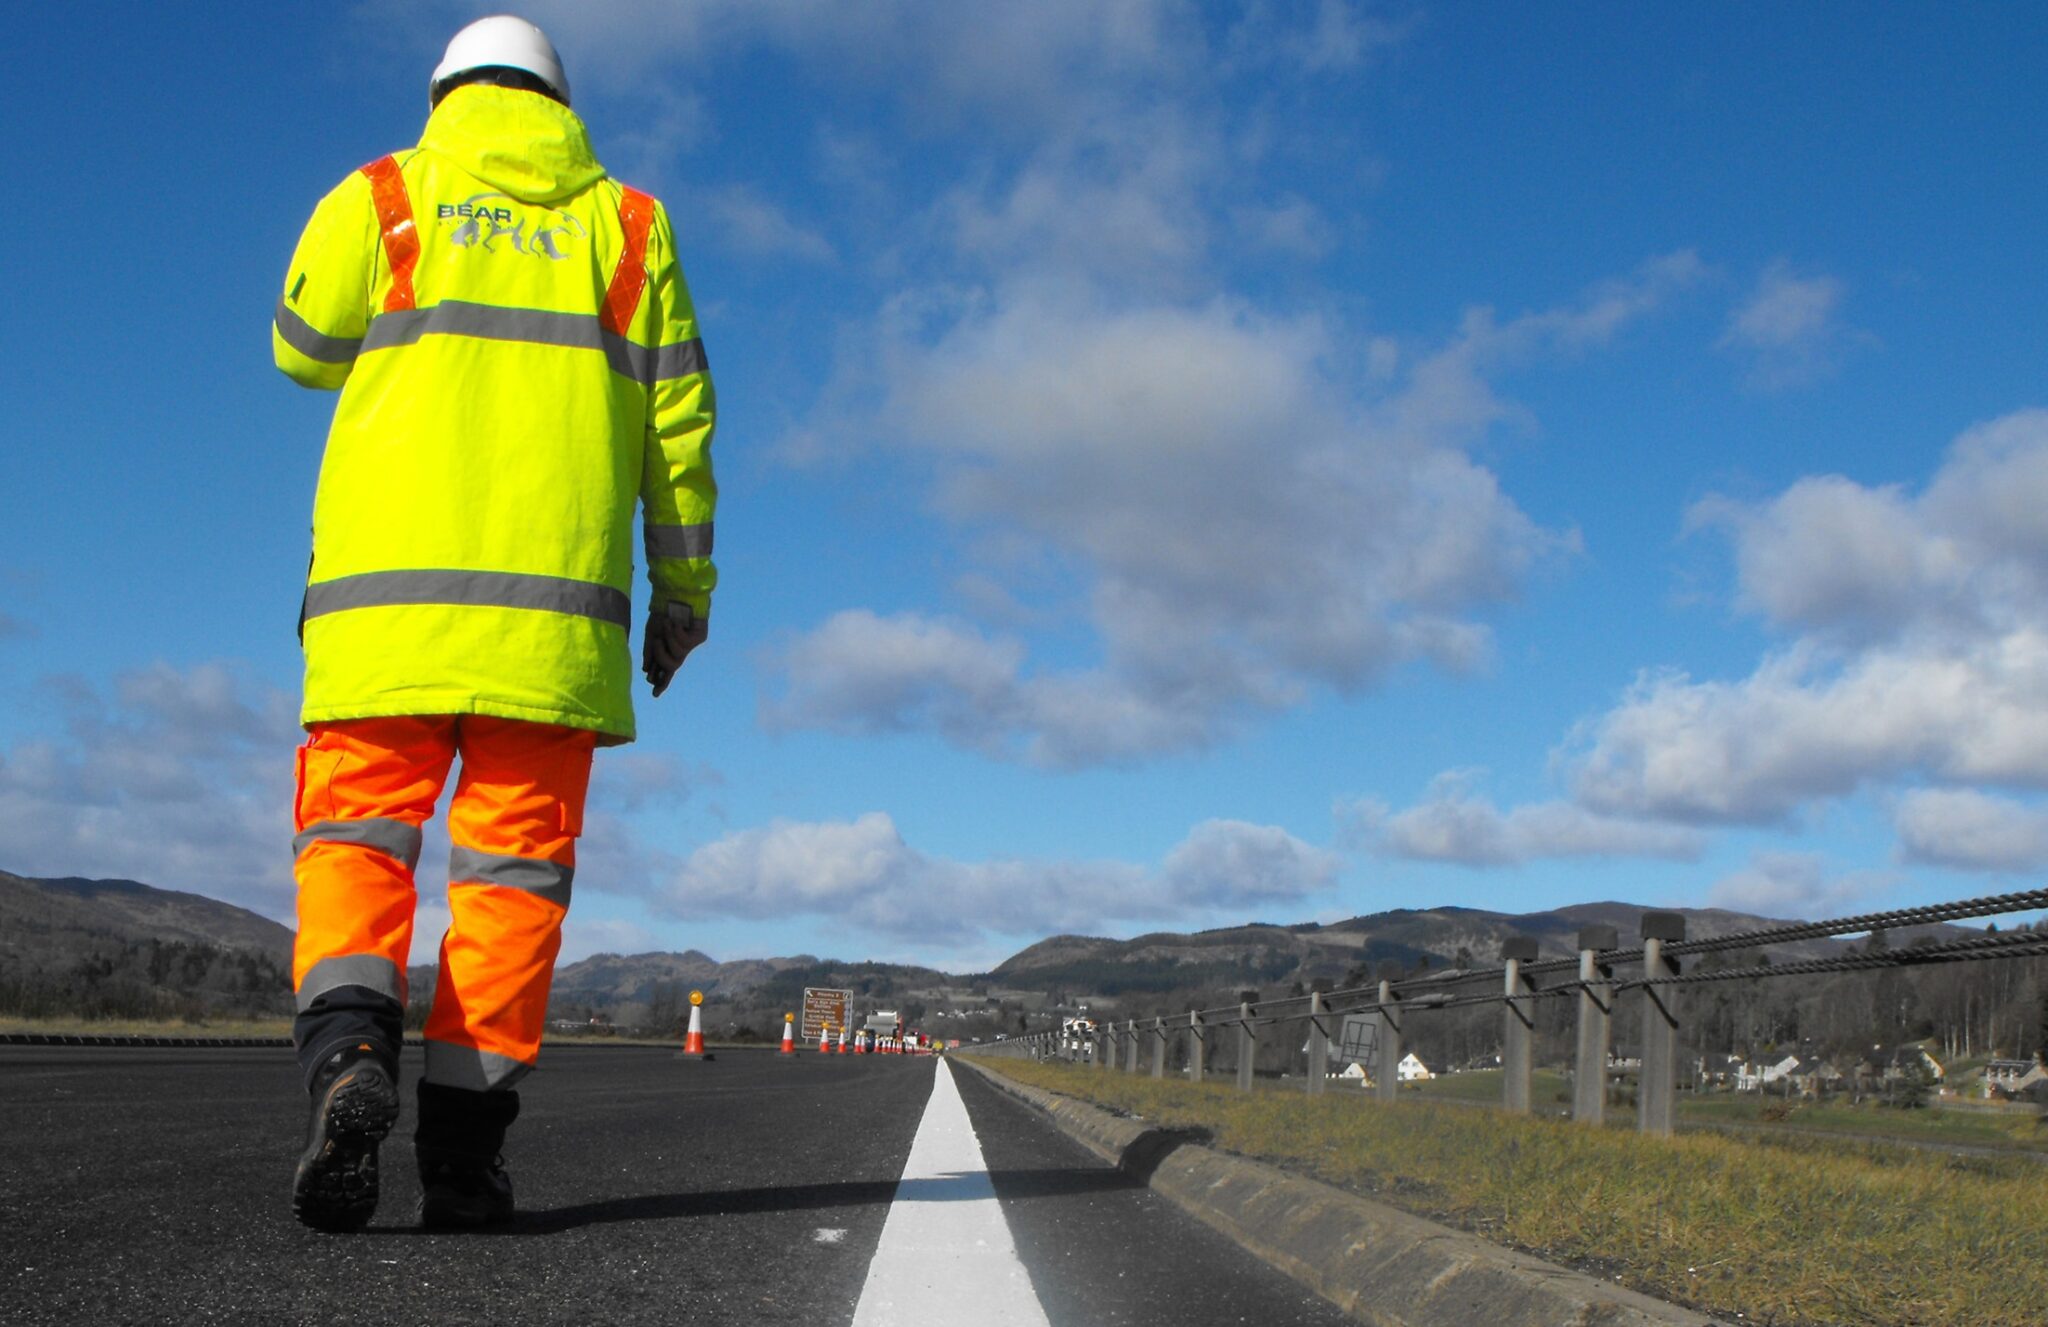 £1.8 MILLION SURFACING IMPROVEMENTS PLANNED FOR A9 SOUTH OF PITLOCHRY